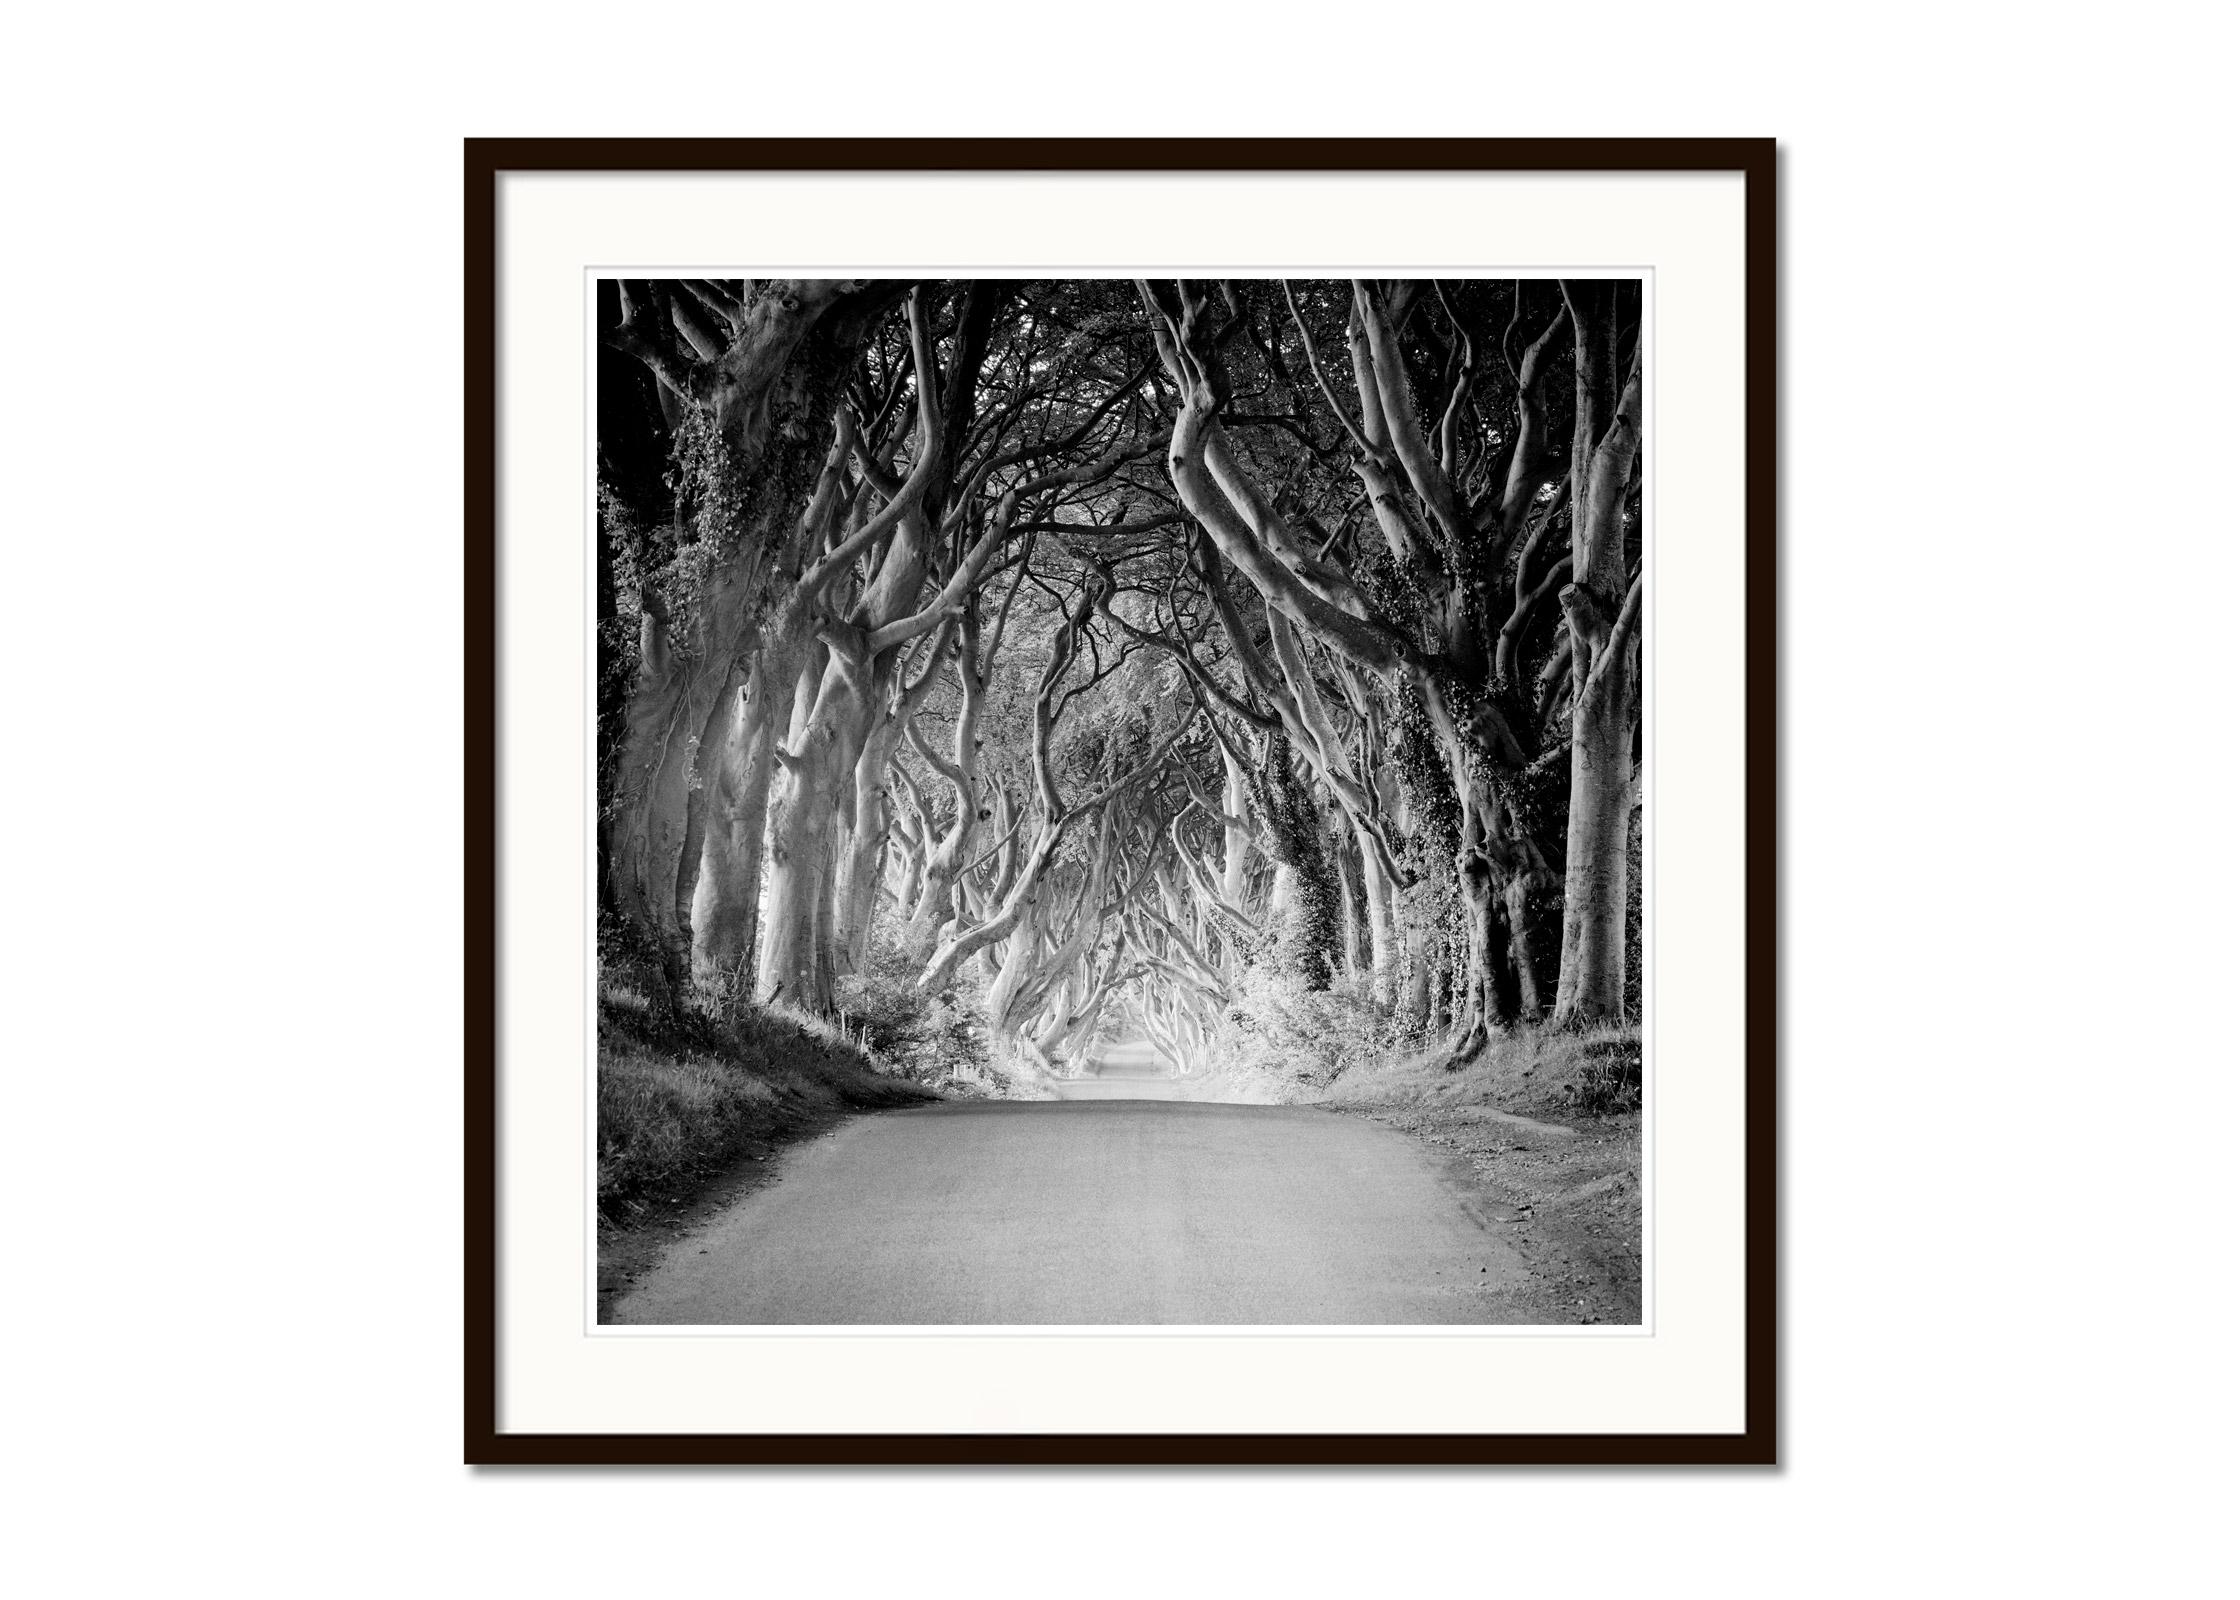 Black and white fine art minimalist landscape photography. The dark hedges, mystical avenue of trees in north Ireland. Archival pigment ink print, edition of 9. Signed, titled, dated and numbered by artist. Certificate of authenticity included.